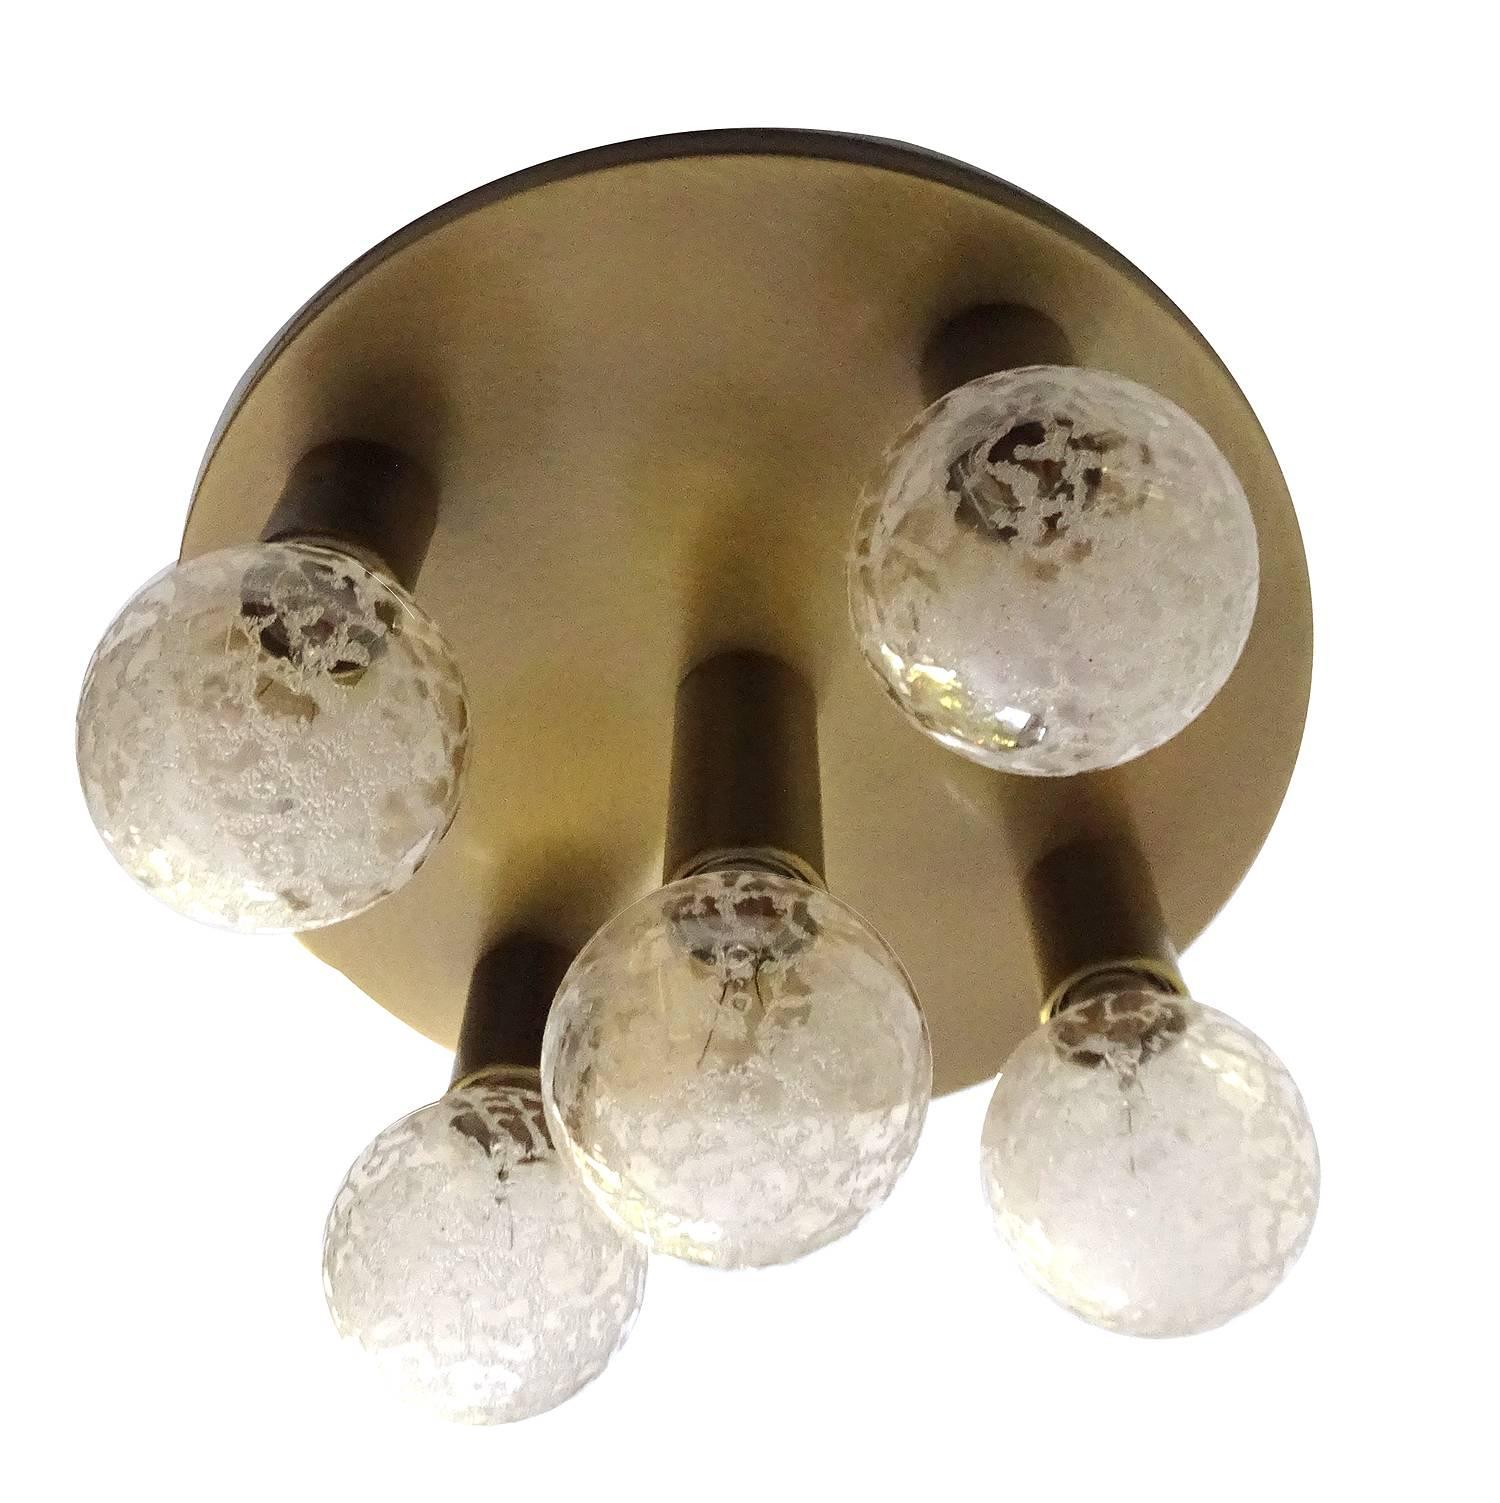 A flush mount light by Kaiser, burnished brass base and bulb fittings
9.06 in.H / 23 cmH
Diameter
14.57 in. (37 cm)
Five standard size bulbs, 60 watts each


The stylish elegance an design suits  mid century to hollywood regency interiors  and